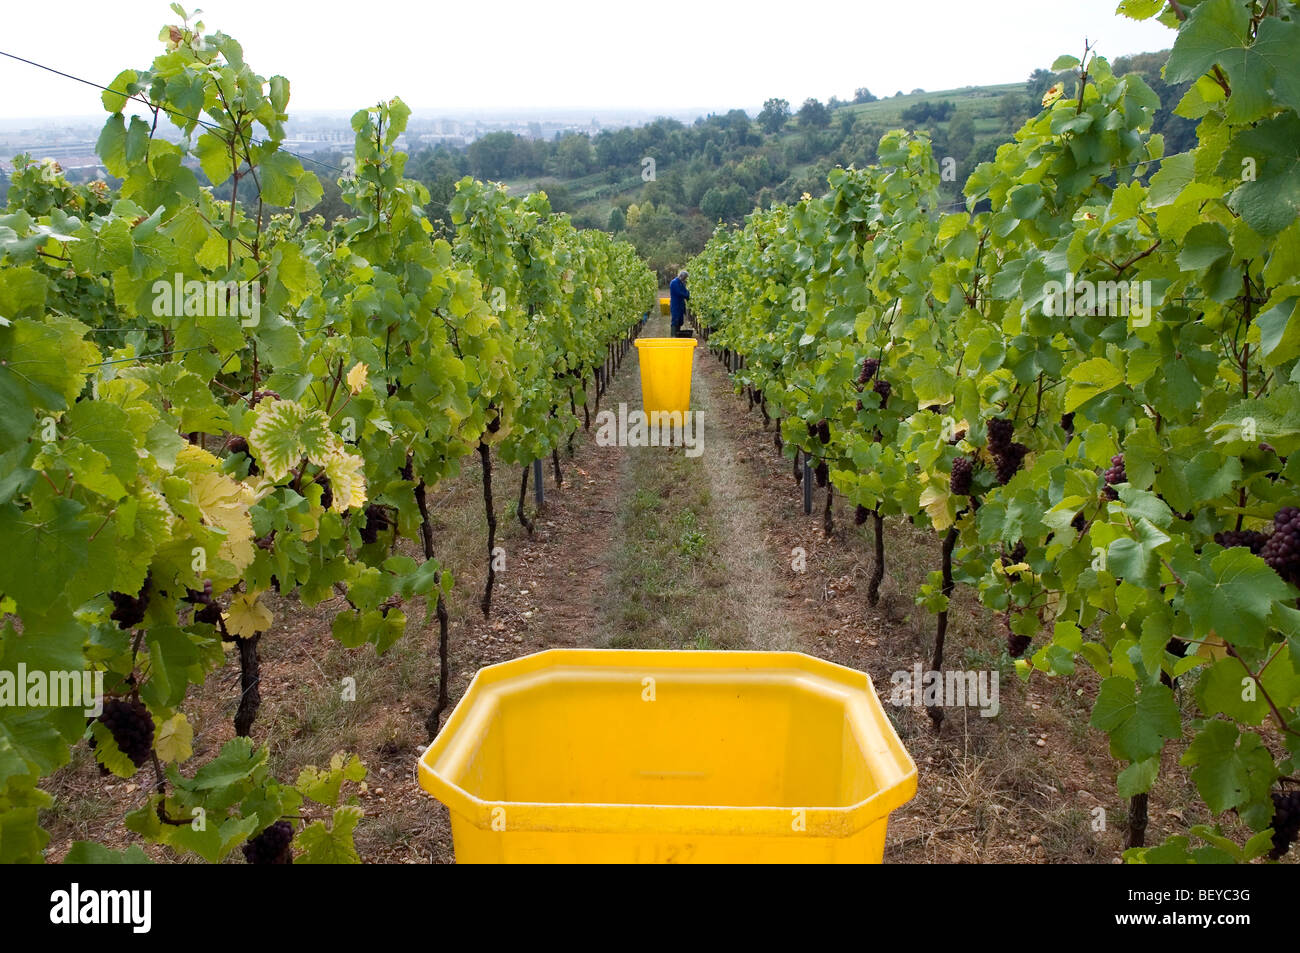 plastic yellow bins for grapes harvest - Alsace - France Stock Photo